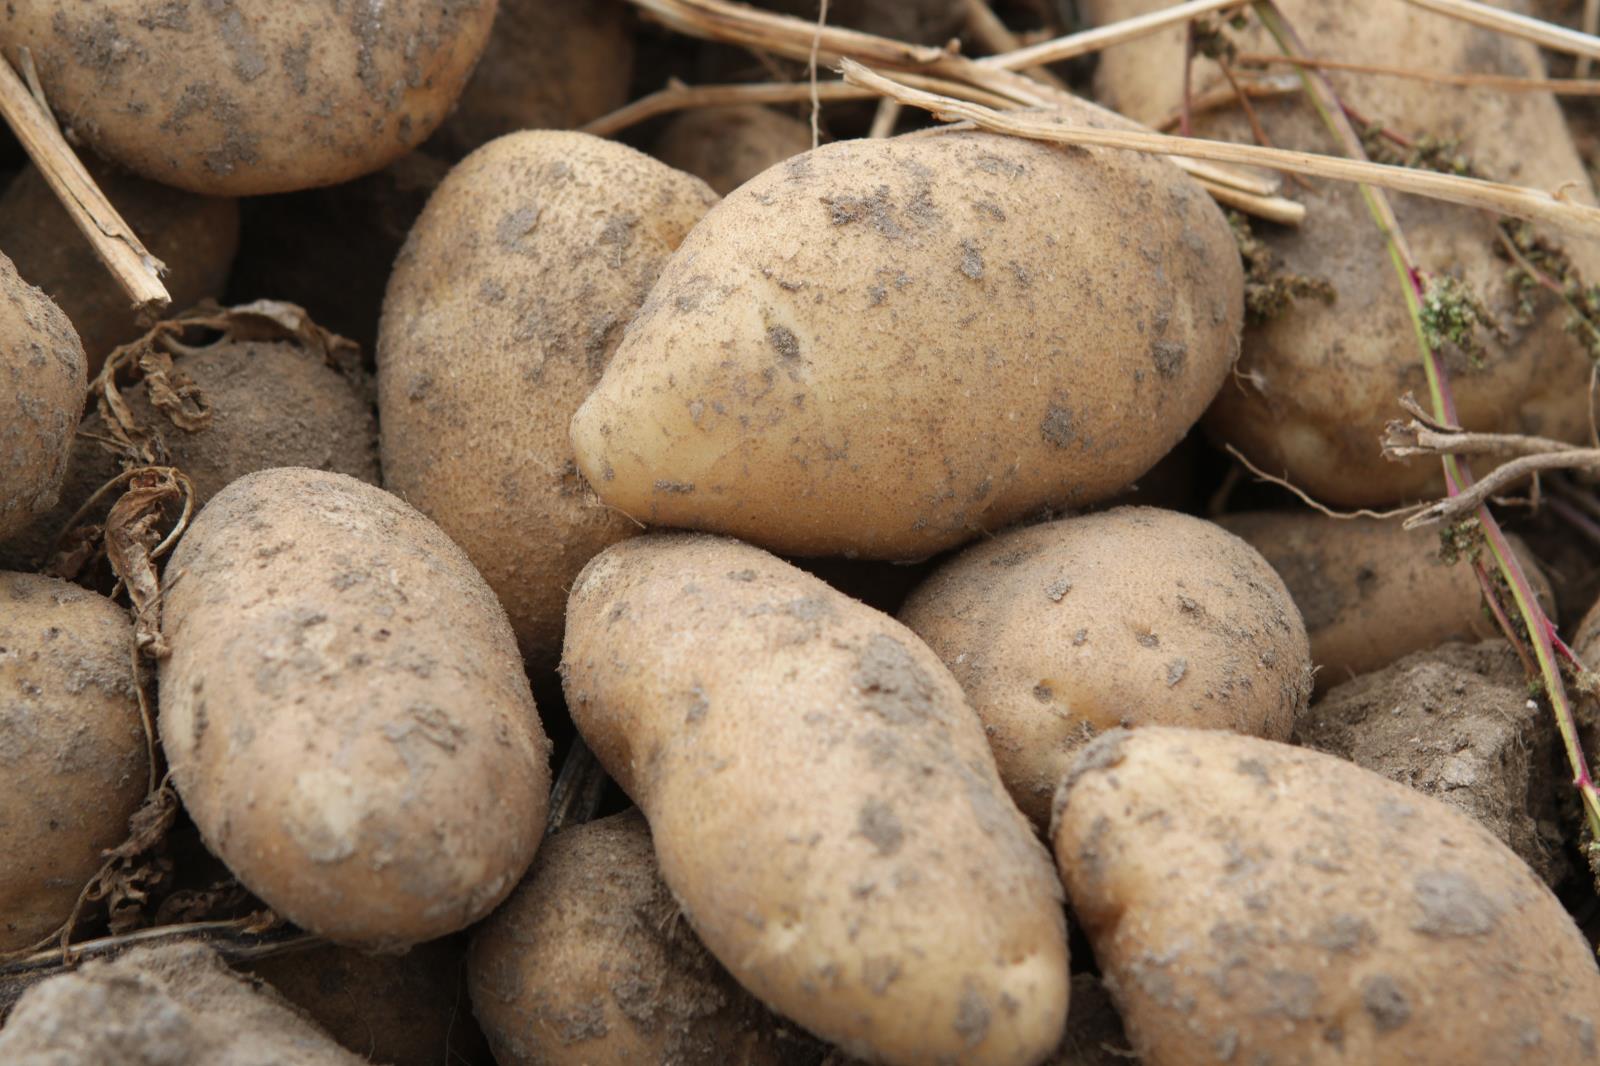 Potatoes are shown in an East Idaho field in this Idaho Farm Bureau Federation file photo. During a recent interview that aired on Veterans Day, actor Gary Sinise said there is no better potato than an Idaho potato. 